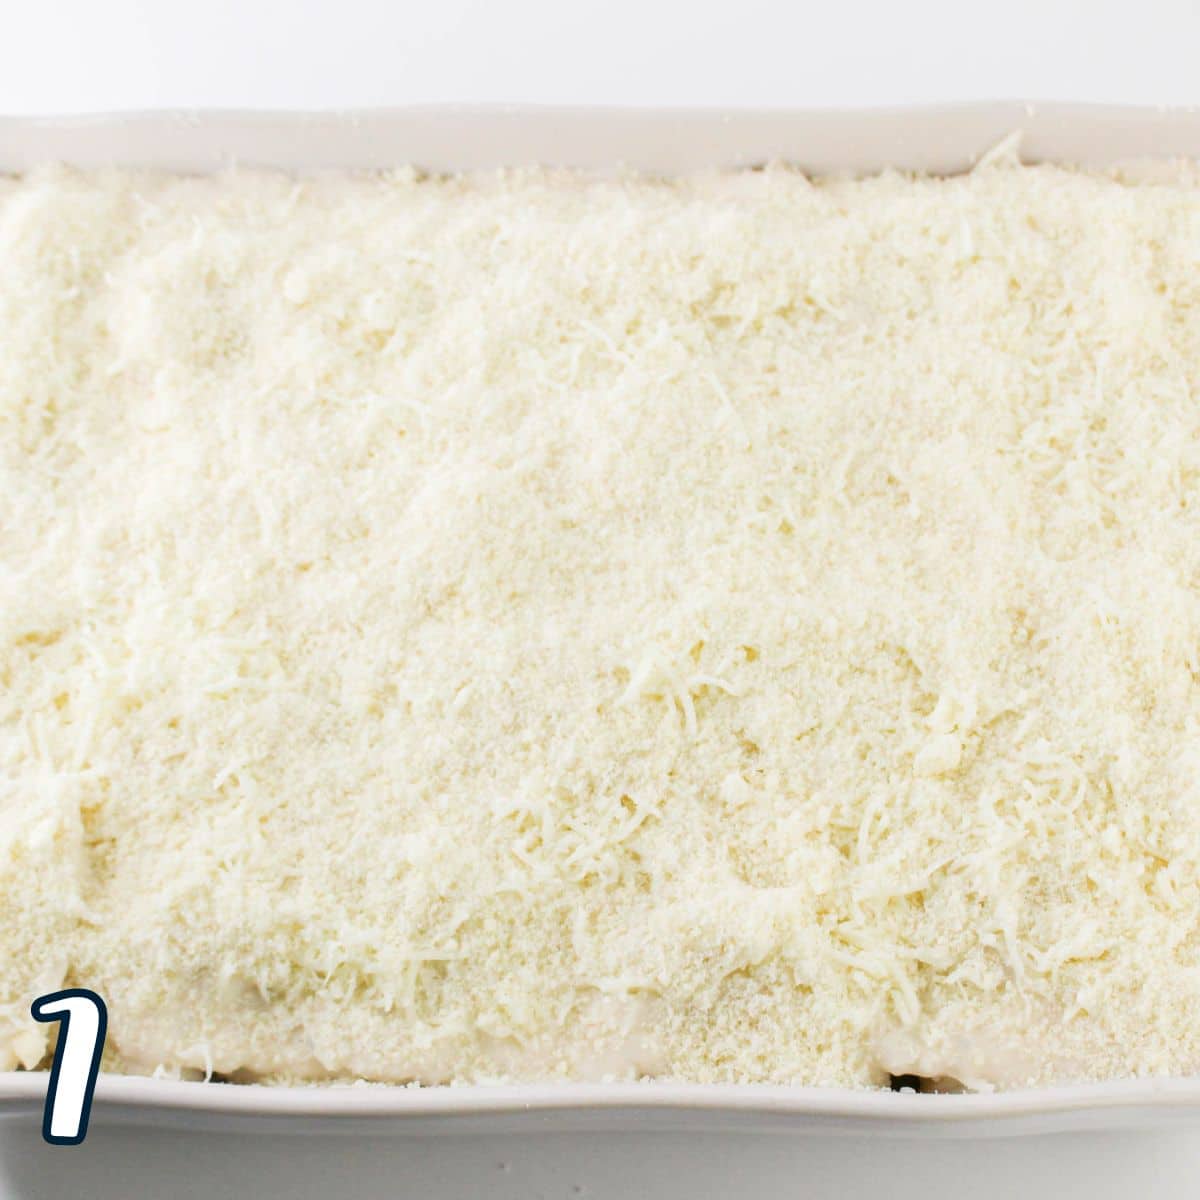 A close-up view of an uncooked, cheese-layered casserole in a white baking dish. The dish is topped with a substantial layer of grated cheese . The number "7" is seen in the bottom left corner.